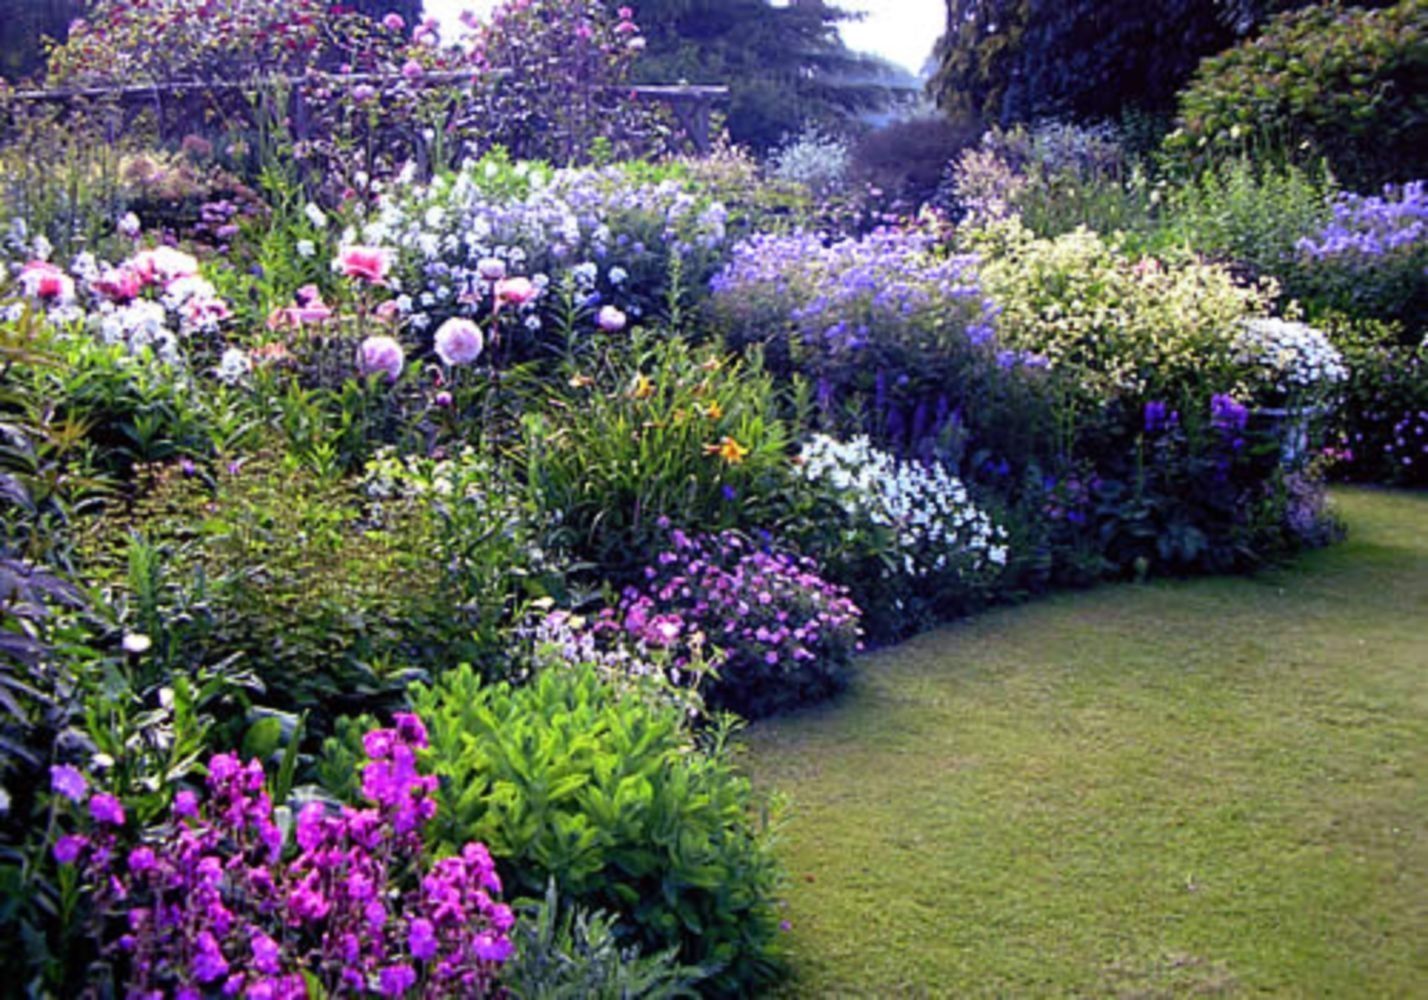 Creating a Beautiful Garden: A Guide to Selecting and Arranging Flowers for Design